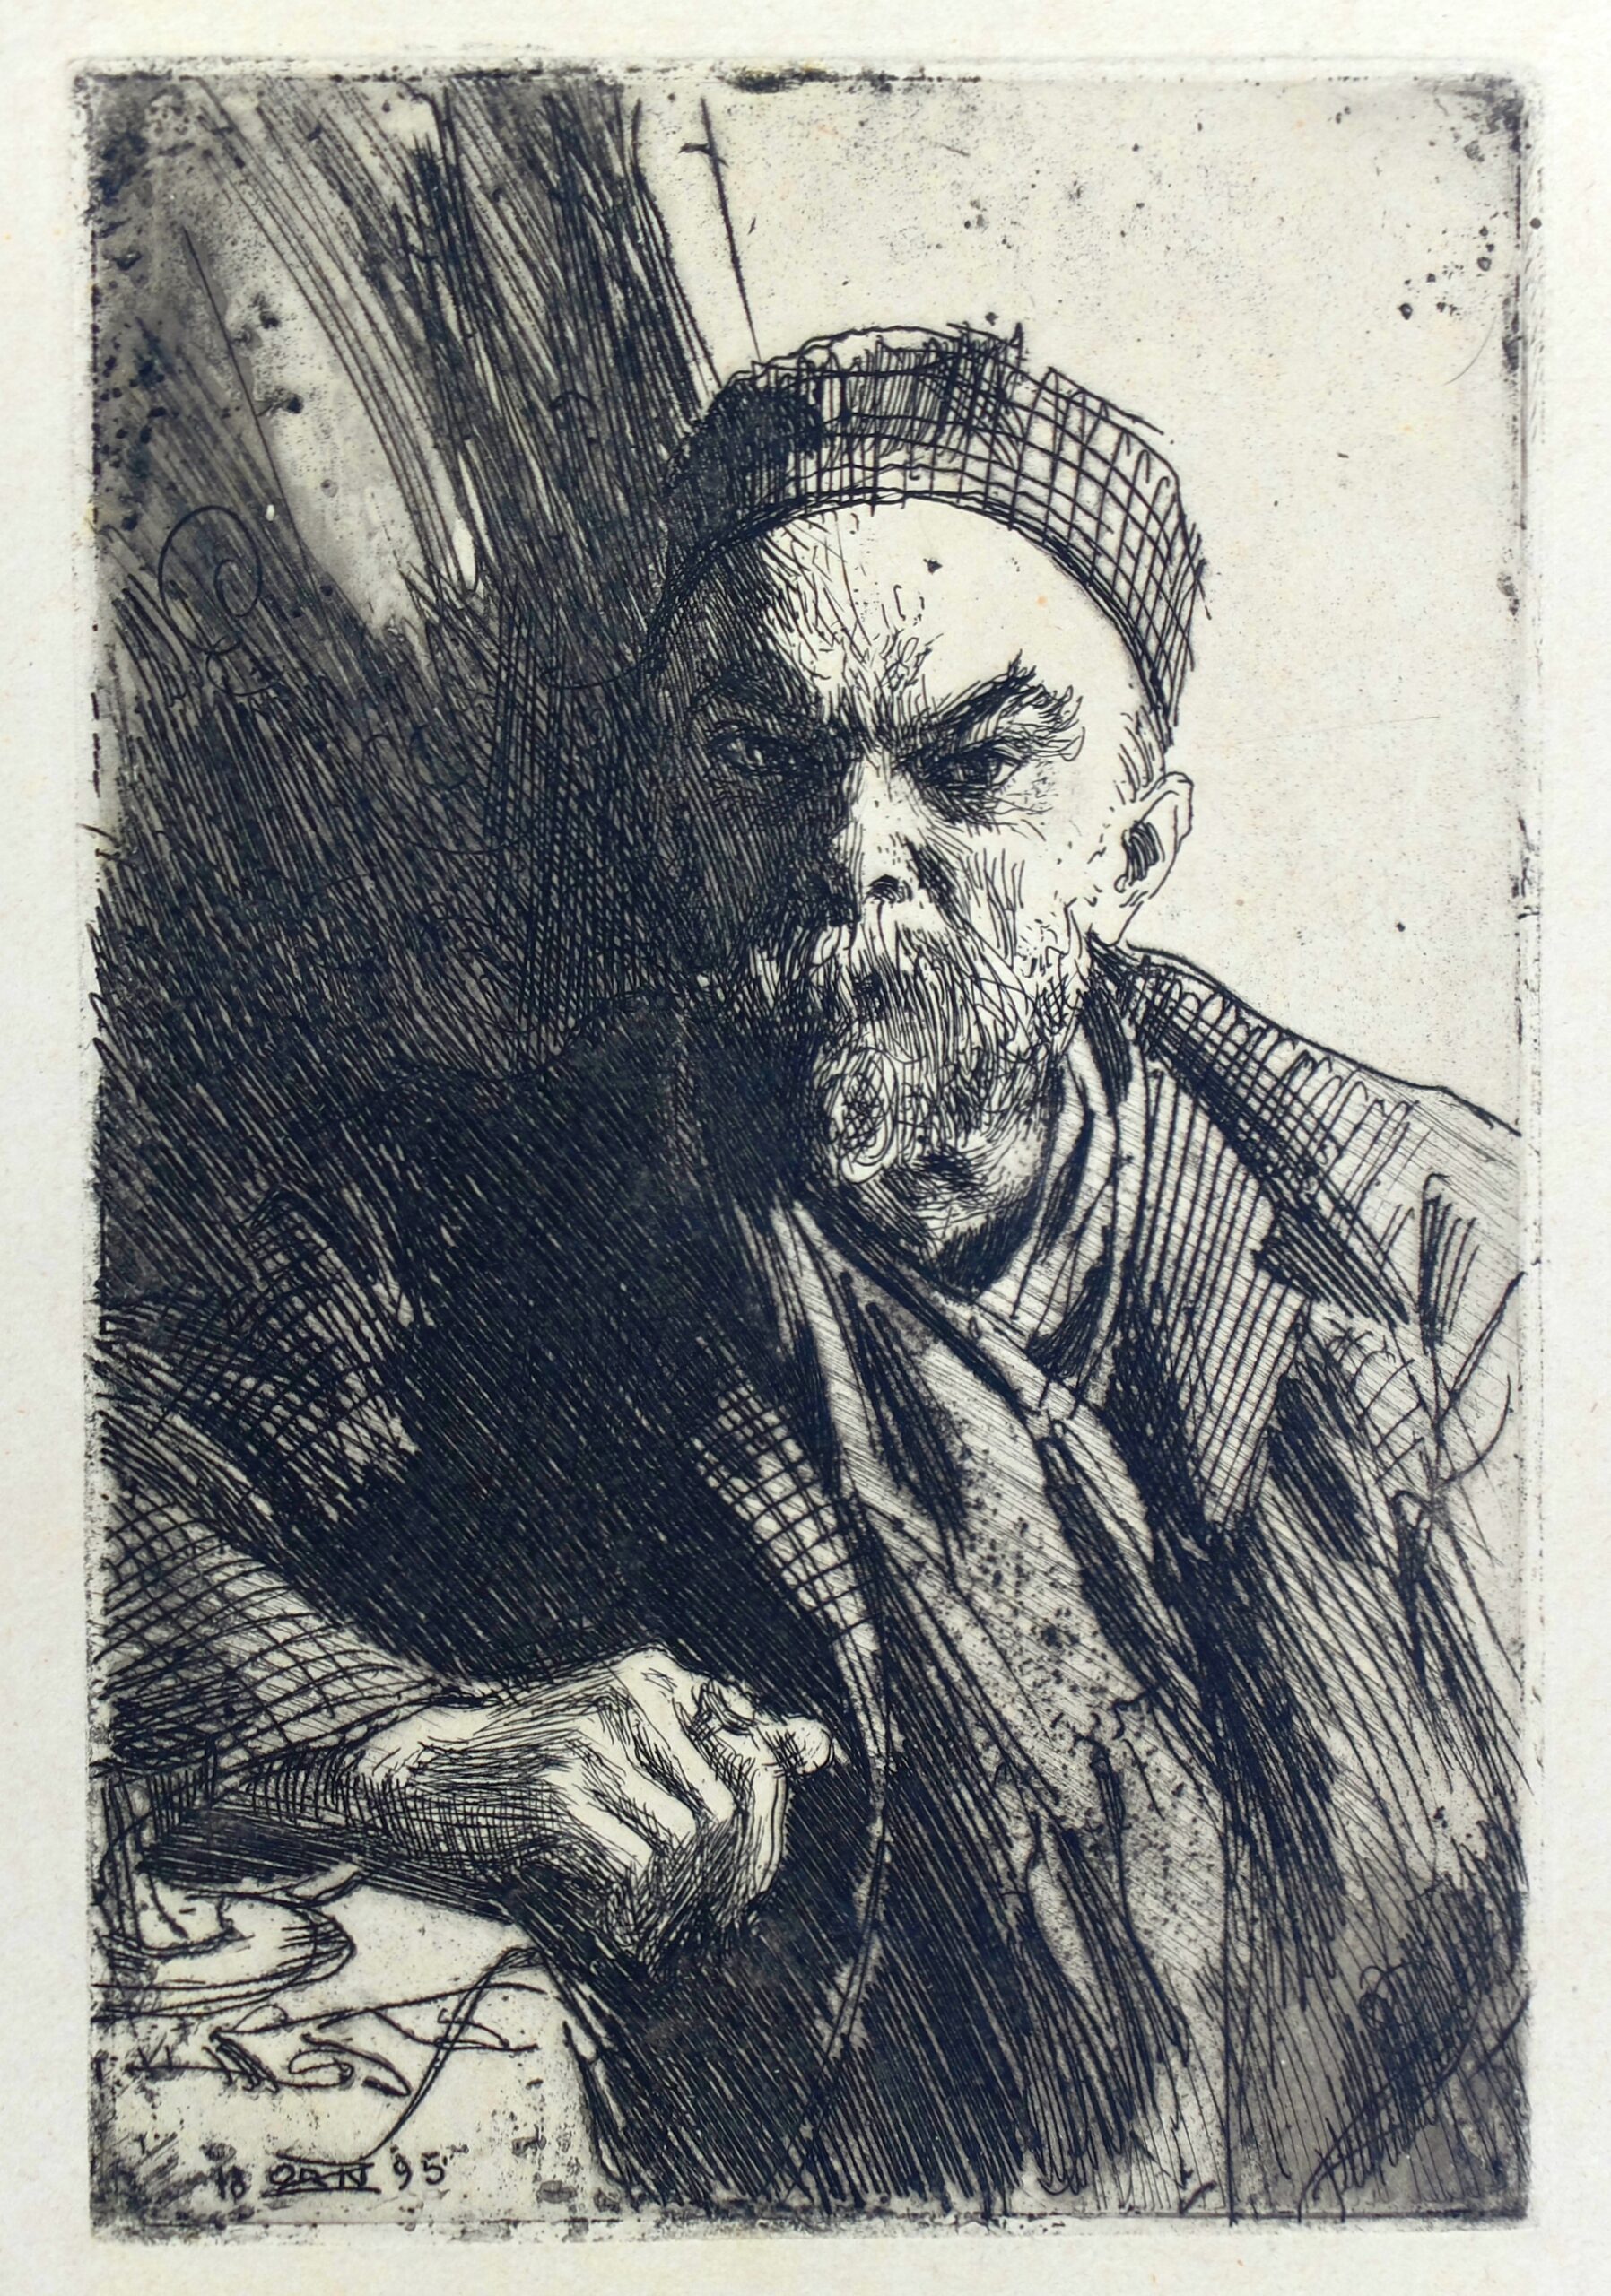 This is a portrait etching of Paul Verlaine, showing his head and torso in frontal position. Only his right arm is in frame. This arm is resting on a flat surface, likely a table or shelf, that is chest-high. Verlaine is wearing a suit jacket, a shirt, and either a loose necktie or scarf. The etcher’s use of lines and crosshatching style makes it difficult to determine the details of Verlaine’s clothing. He is wearing a brimless cap (possibly a skullcap). His hair is obscured by his cap. He has bushy eyebrows as well as a full moustache and medium-length beard. He is wearing a ring (possibly a signet ring) on his right index finger. The left side of the image is in shadow. The flat surface Verlaine rests his arm on has some indeterminate flat shapes and curved lines on it.